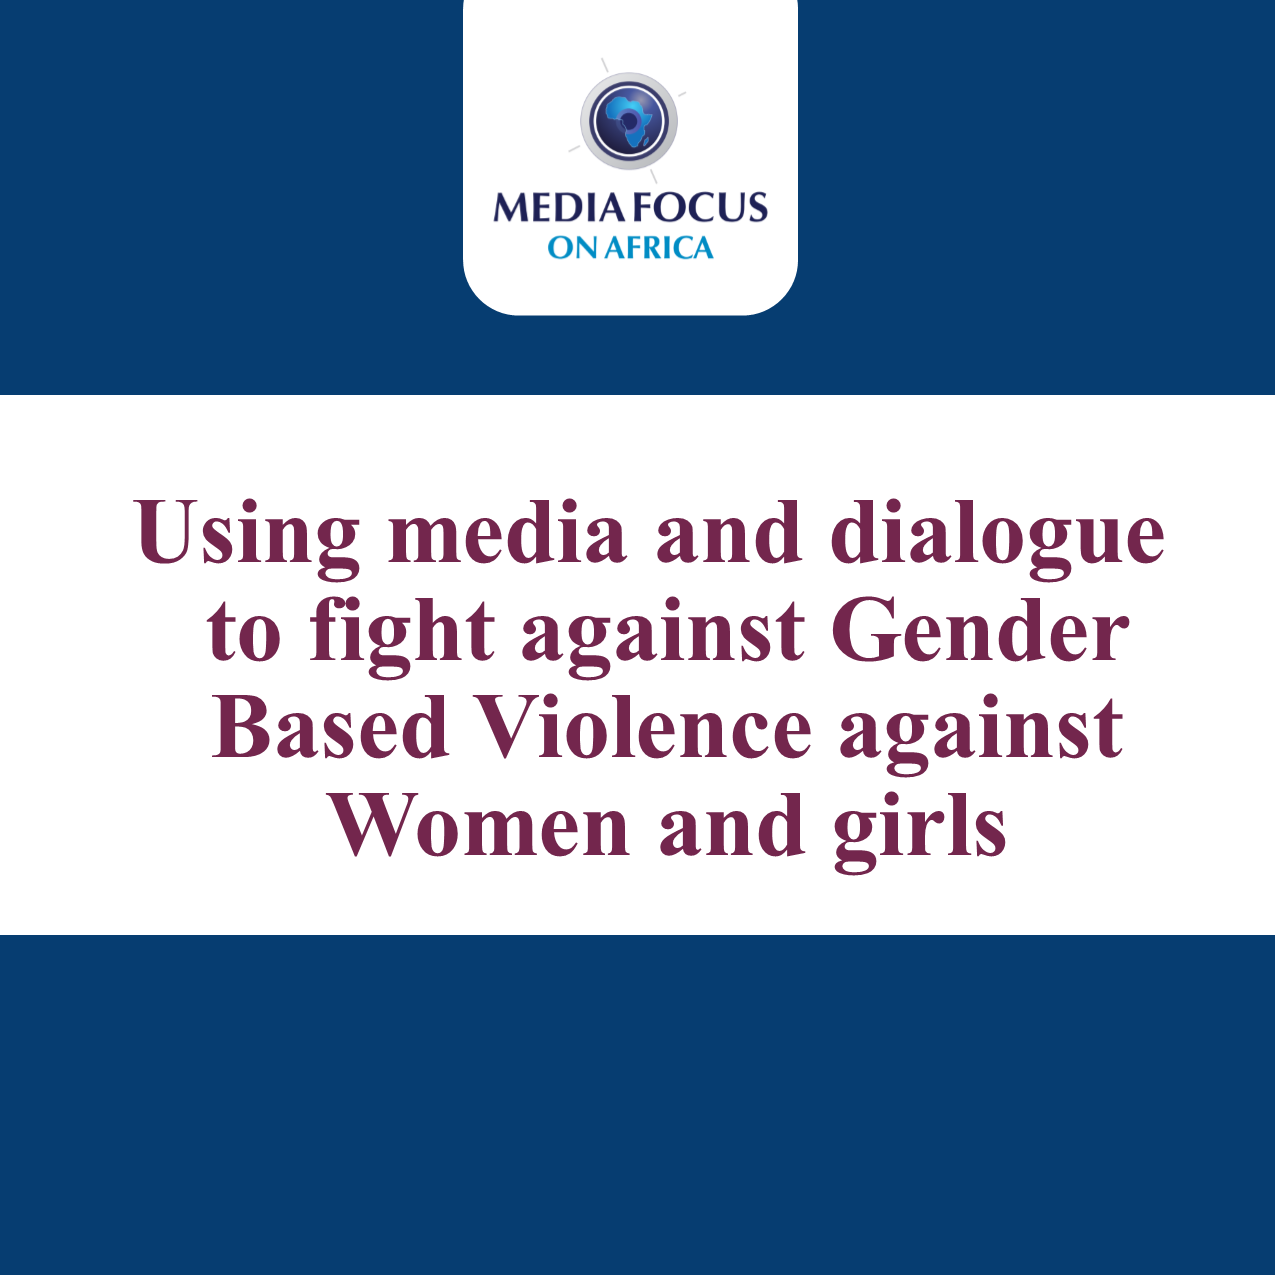 Using Media and Dialogue to fight against GBV against women and girls